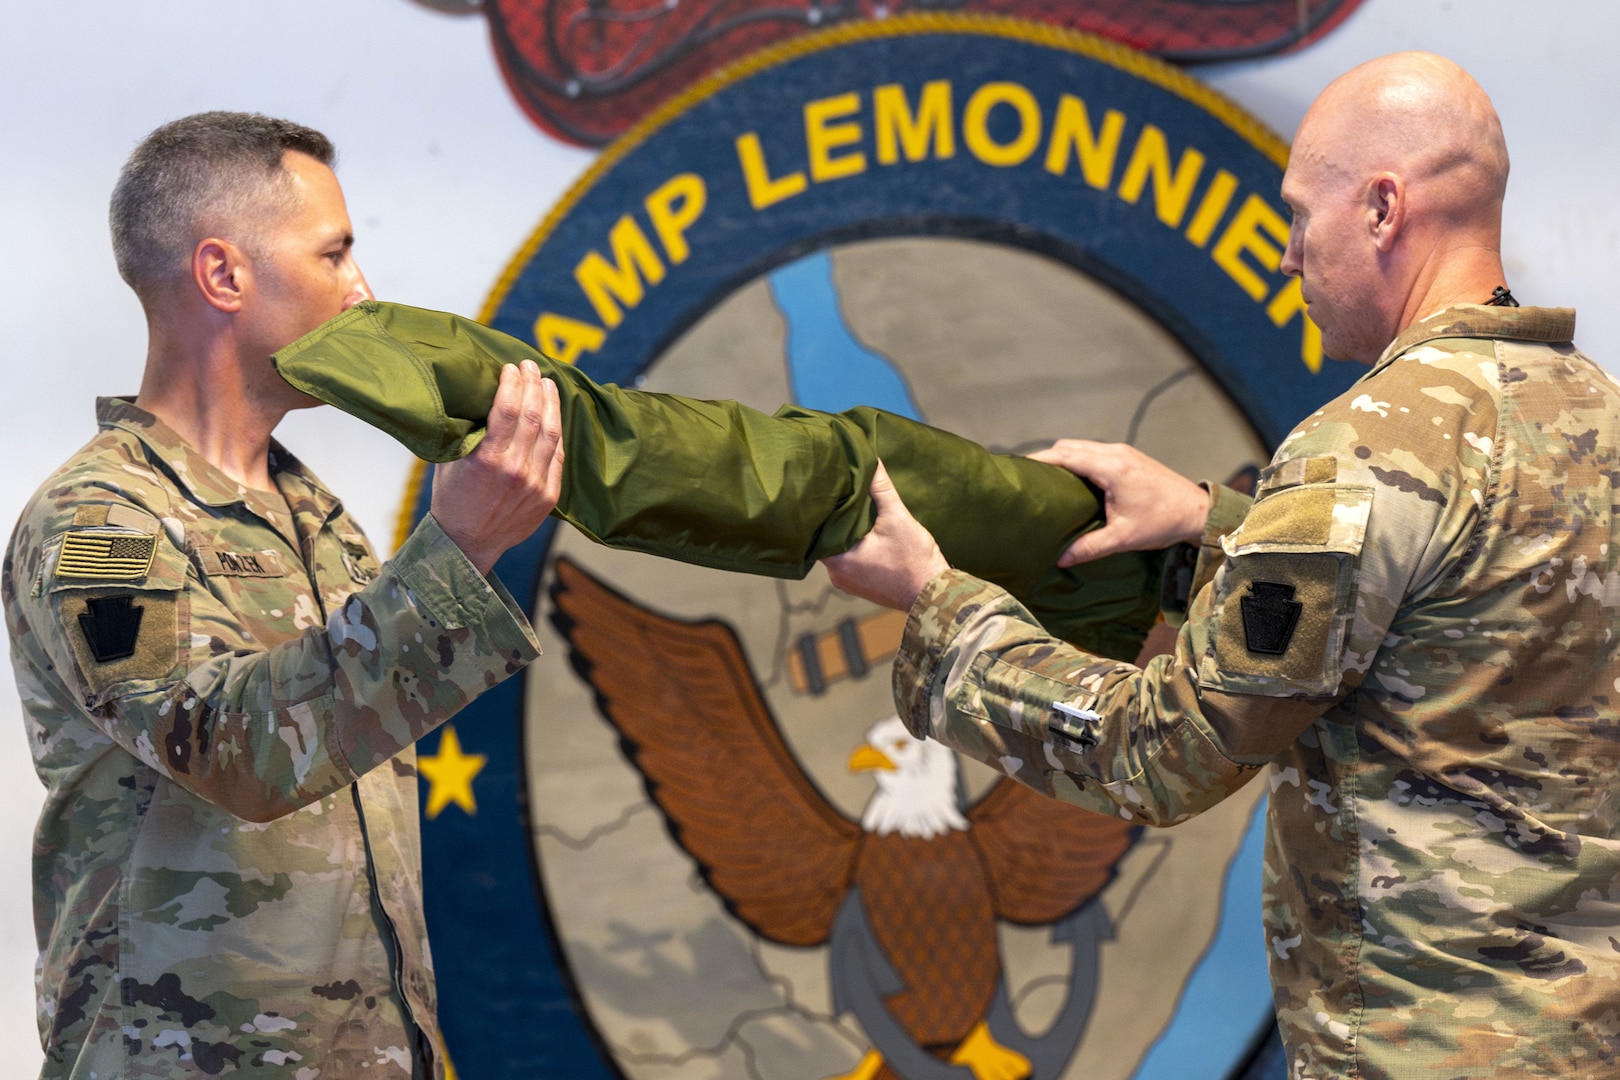 U.S. Army Lt. Col. Erik Ponzek, left, commander of 2-112th Infantry, and Command Sgt. Maj. Jason Barclay, 2-112th Infantry senior enlisted leader, unfurl their unit's colors during a transfer of authority ceremony at Camp Lemonnier, Djibouti, Feb. 10, 2024. This act represented Pennsylvania National Guard's Task Force Paxton assuming control over the SECFOR unit in CJTF-HOA.